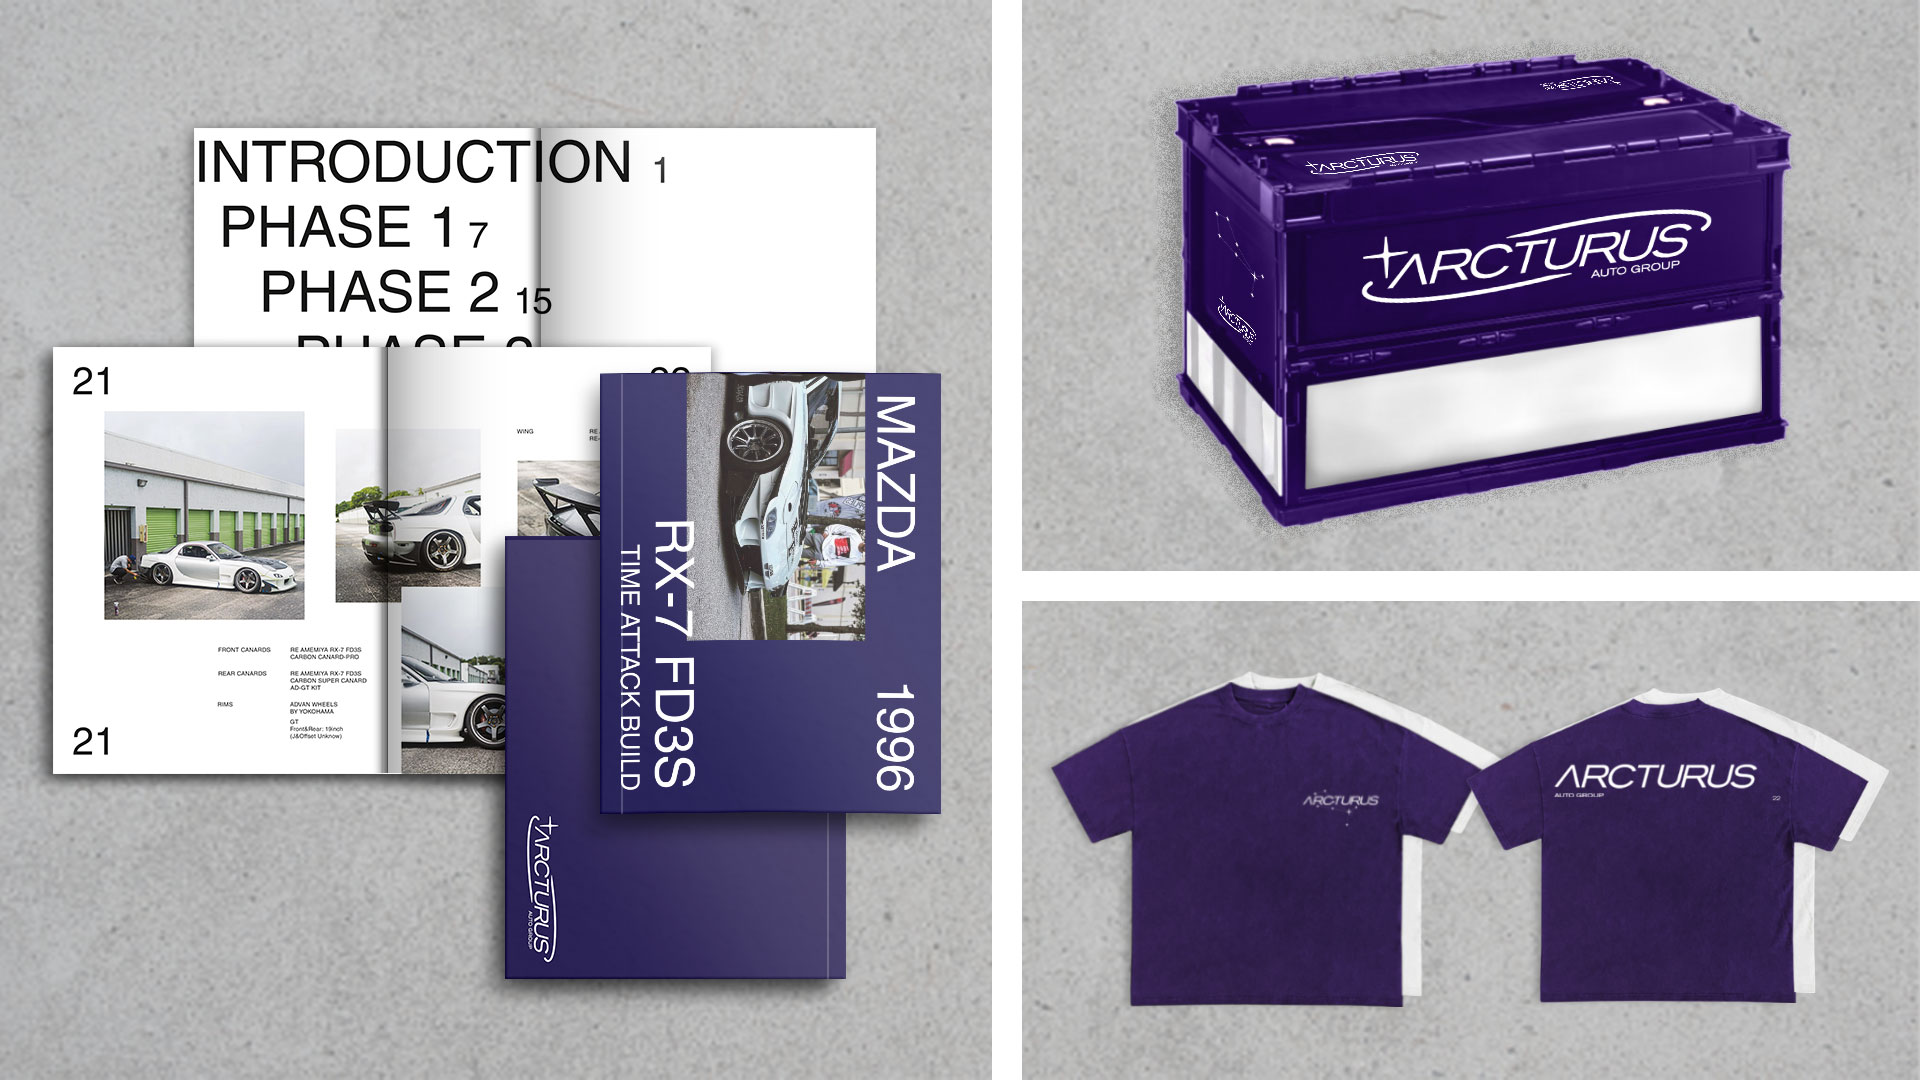 A display of branded items for Arcturus Auto Group including a zine, a foldable container, and T-shirt designs.